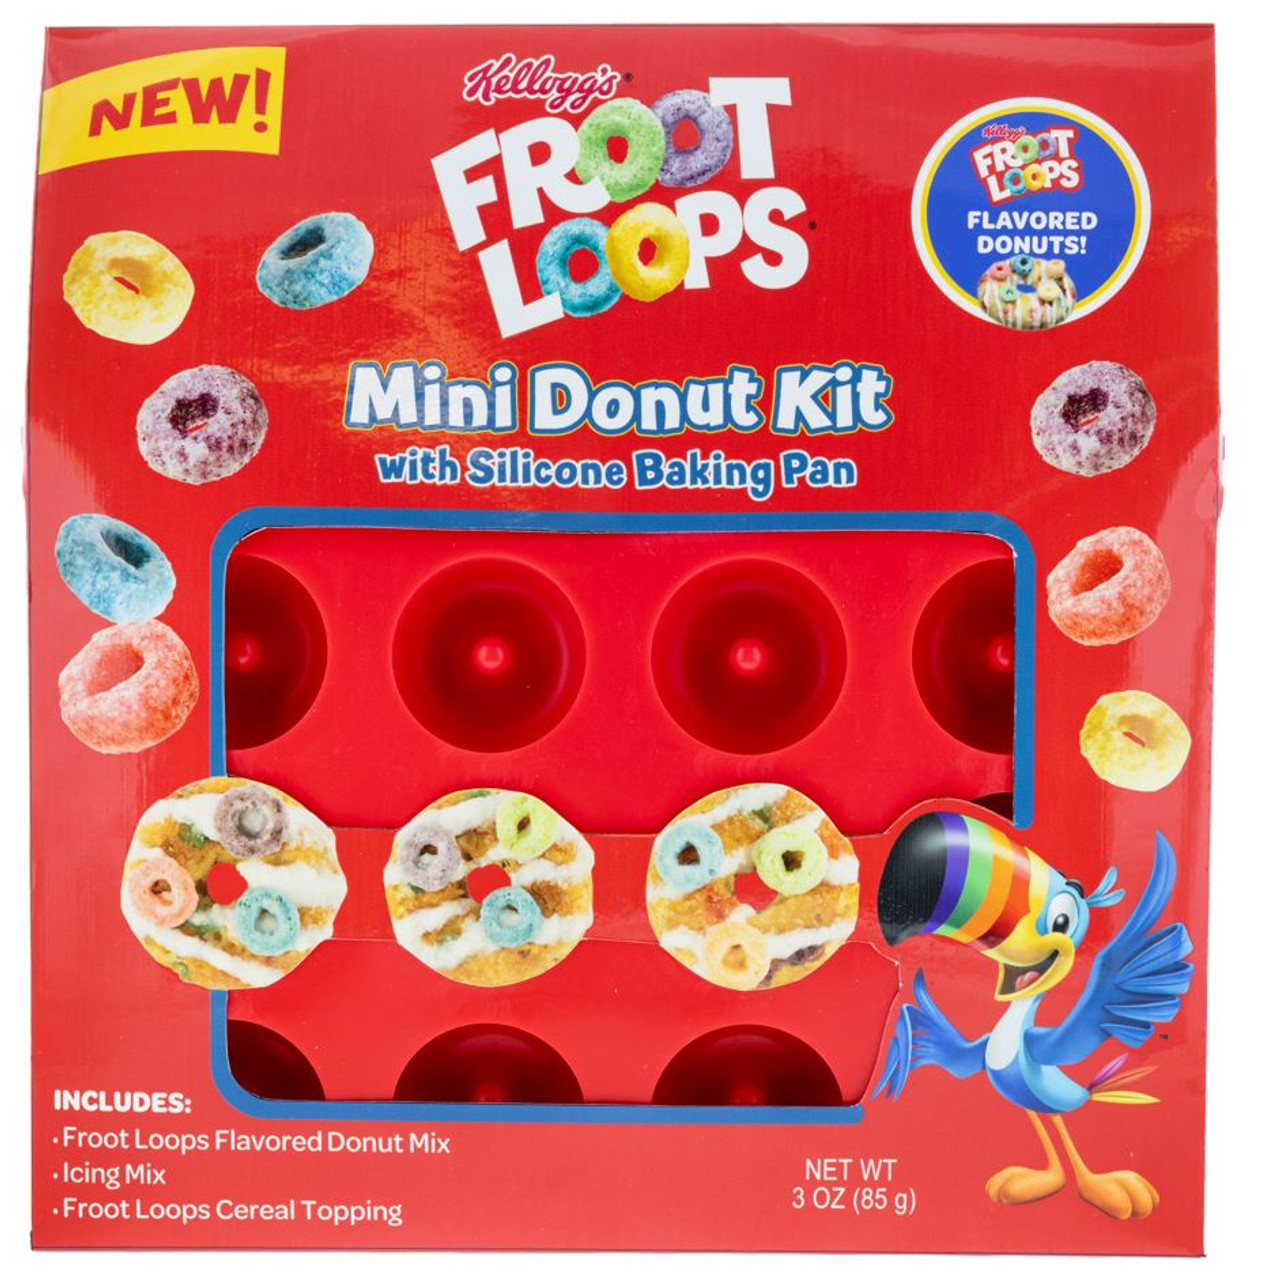 https://cdn11.bigcommerce.com/s-s400f38mcs/images/stencil/1280x1280/products/858/3227/860777022_Froot_Loops_Donut_Kit_v2__44300.1673455319.JPG?c=1